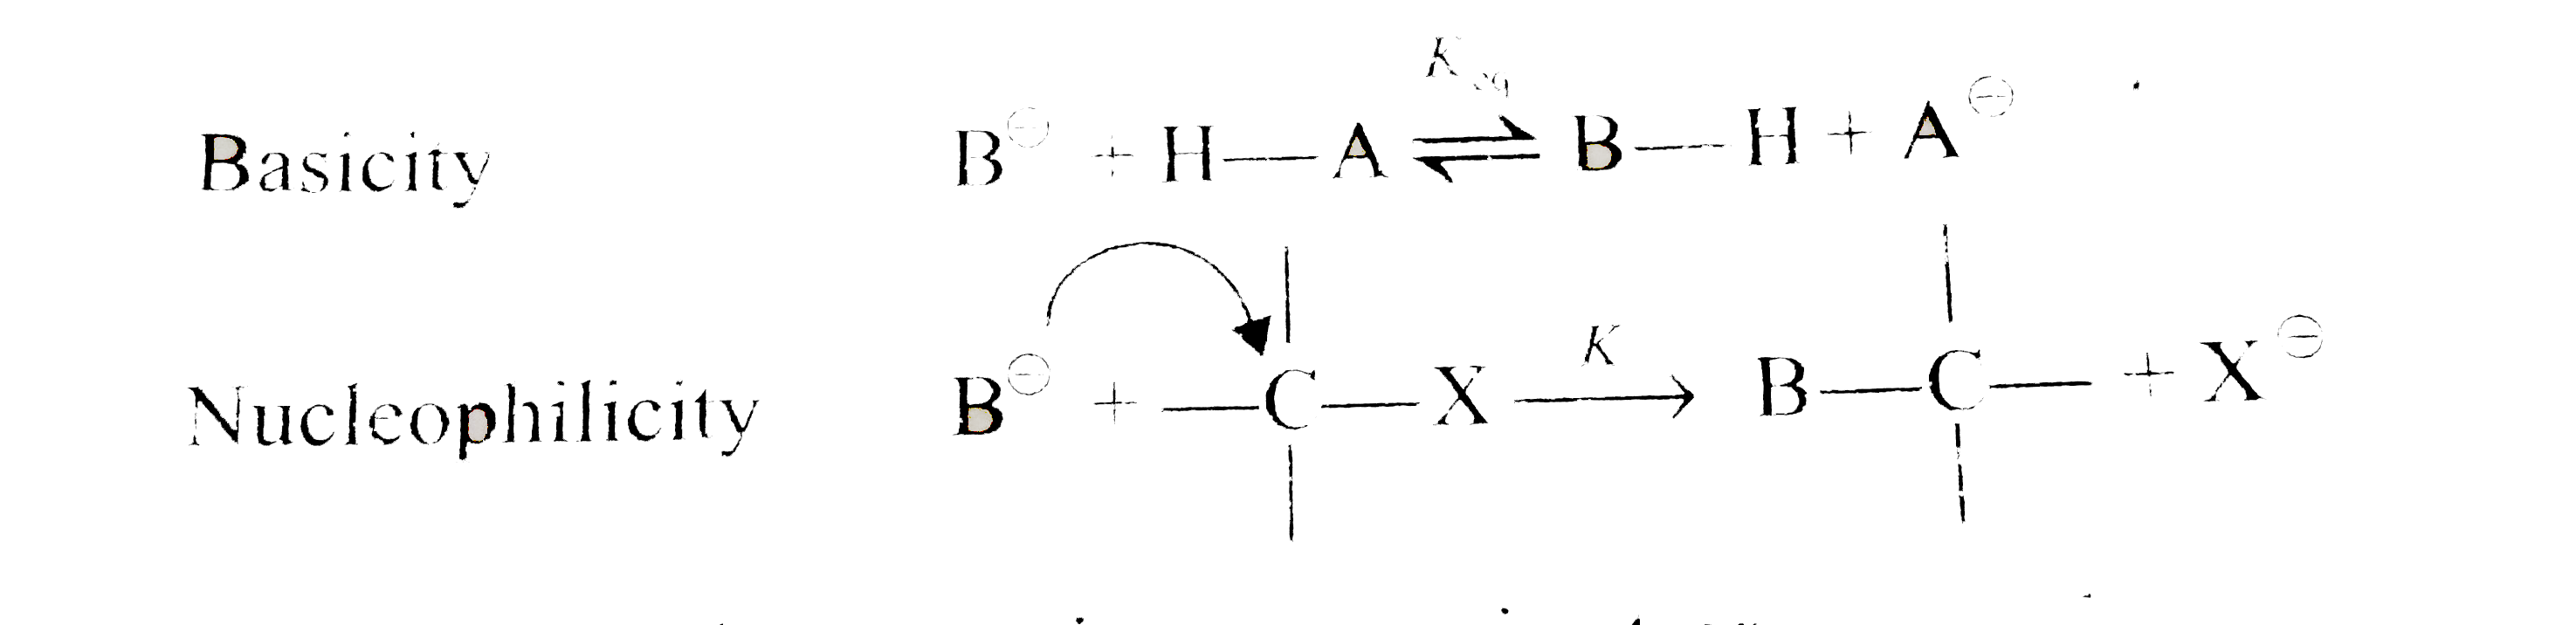 Basicity is defined by equilibrium constant for abstracting a proton. Nucleophilicity is defined by rate of attack on an electrophilic carbon atom,      A species with a negative charge is stronger nucleophile than similar neutral species.Nucleophilicity decreases form left to right in periodic table and increases down the group in periodic table. As the size of similar type of negatively charged species increases, basicity increases and nuleophilicity decreases.   Which of the following is incorrect order of nucleophilicity?